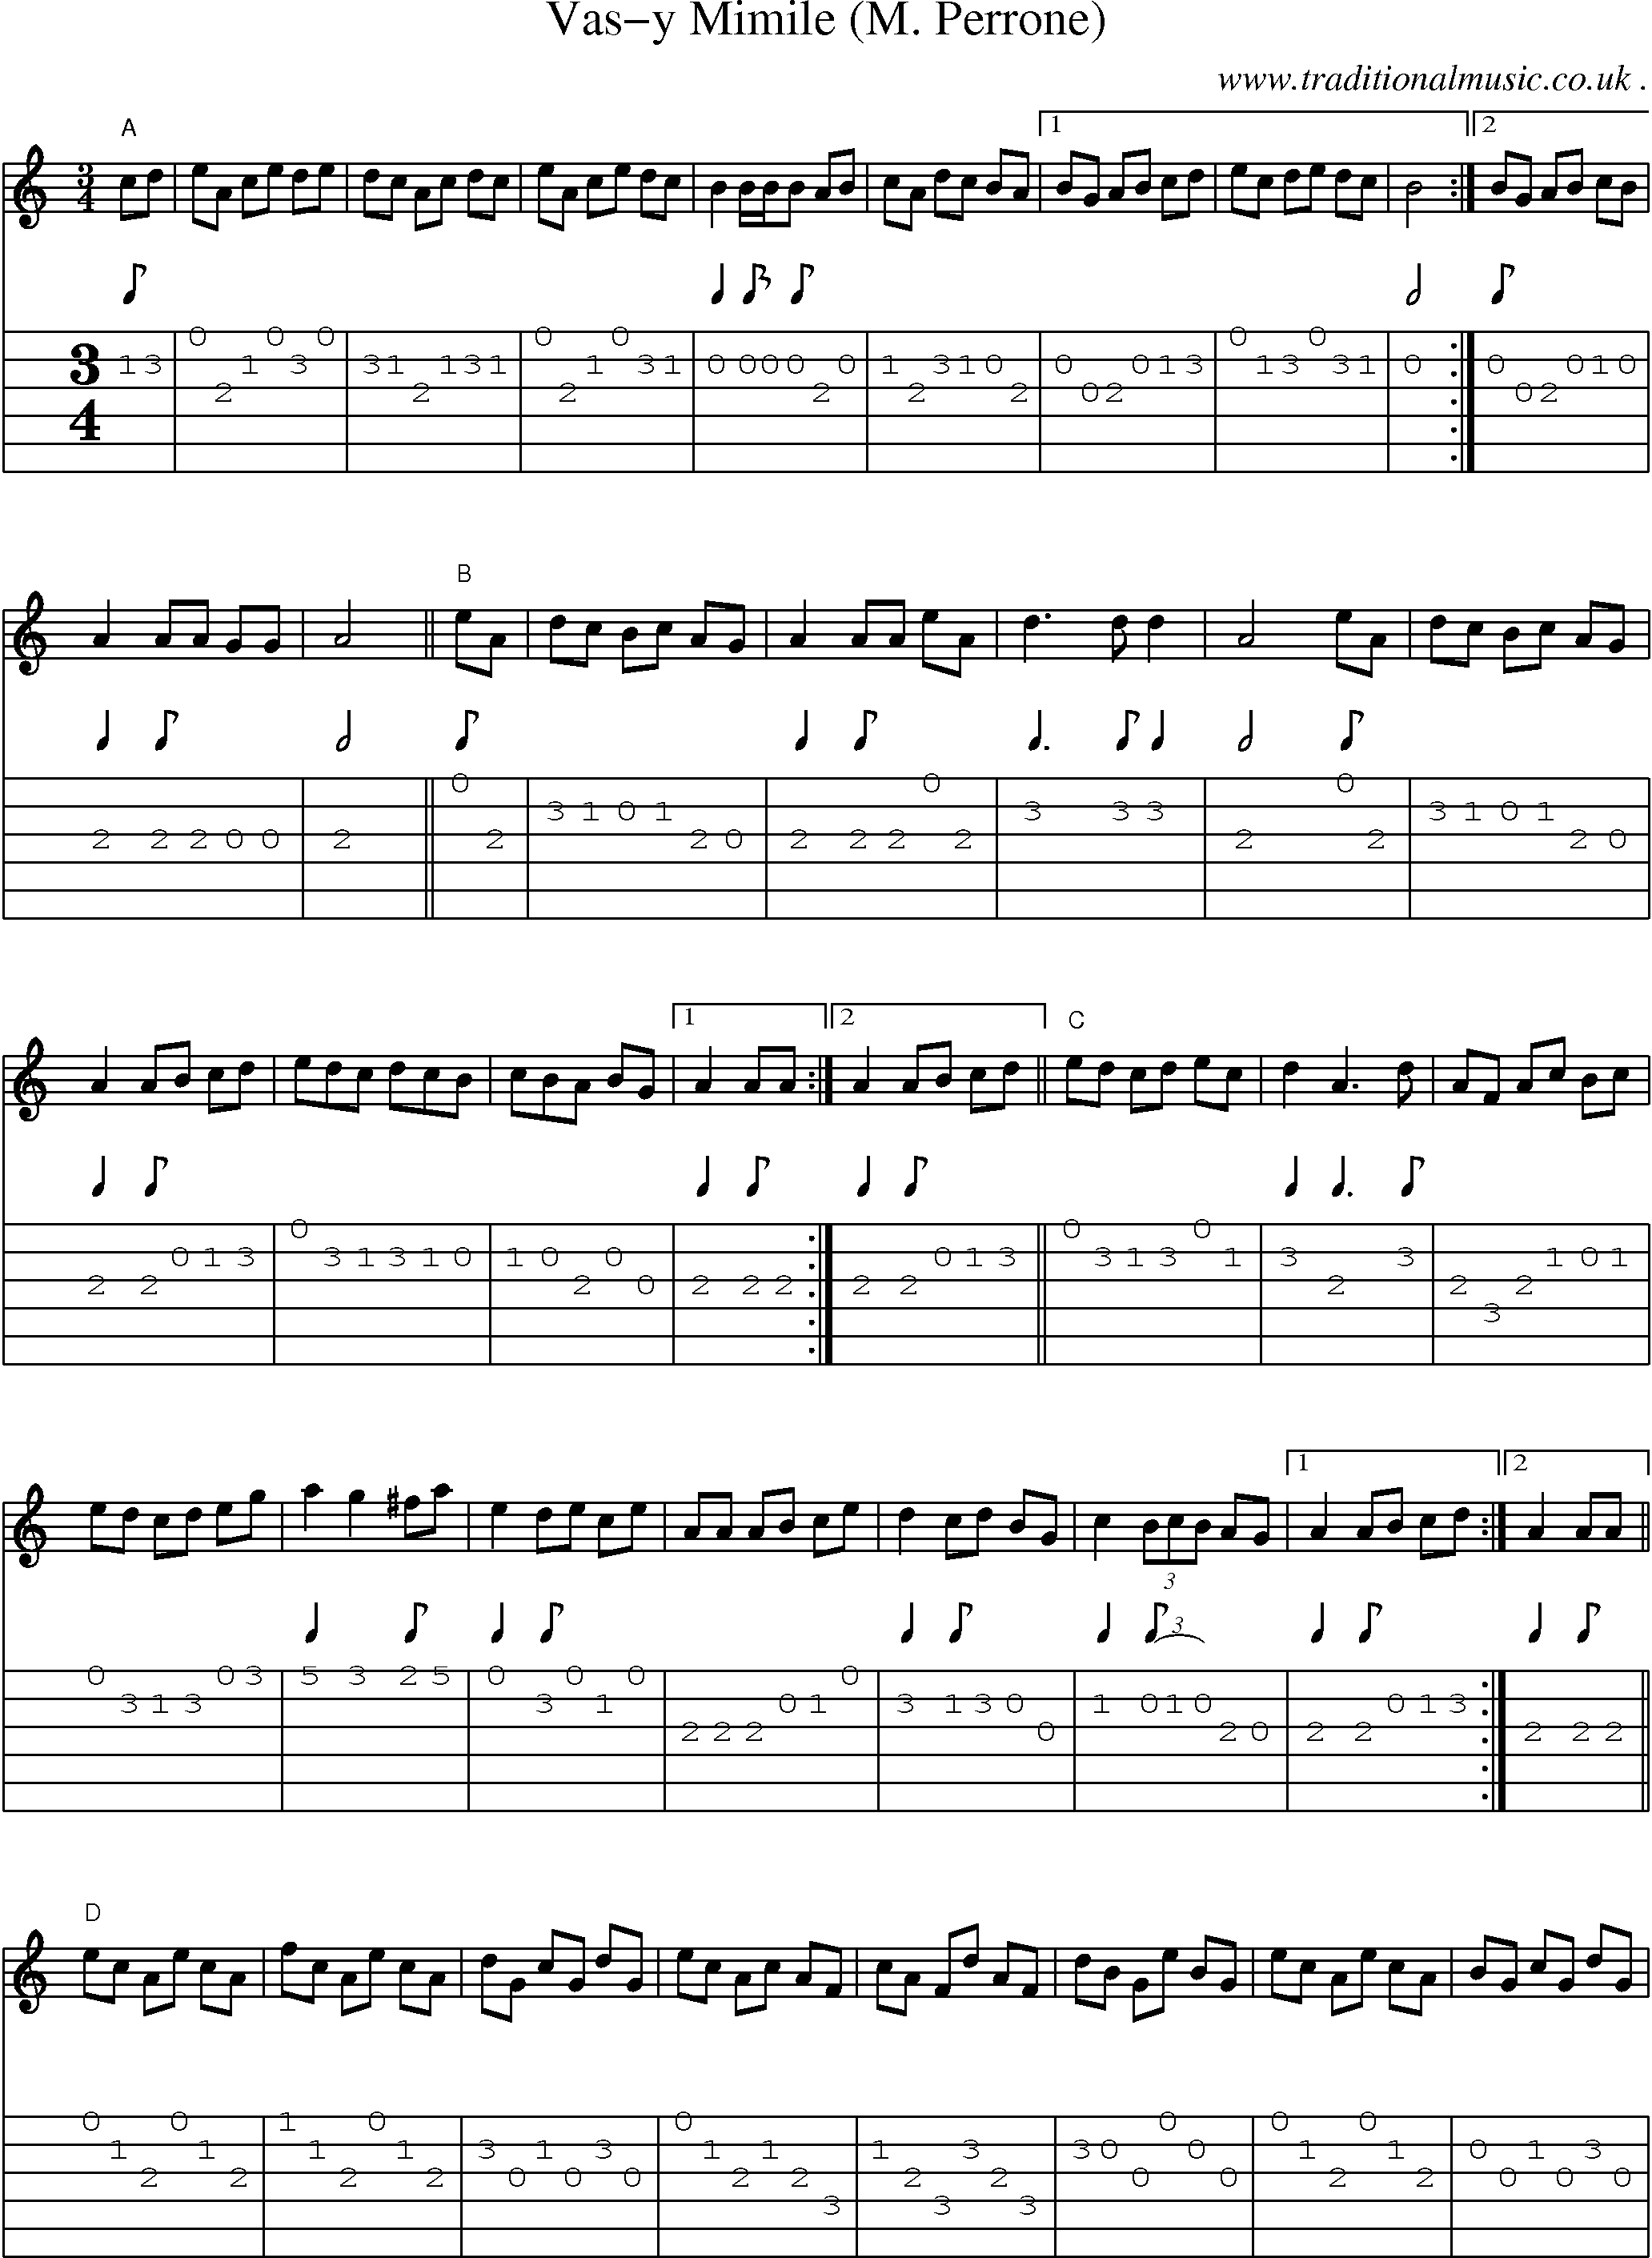 Sheet-Music and Guitar Tabs for Vas-y Mimile (m Perrone)